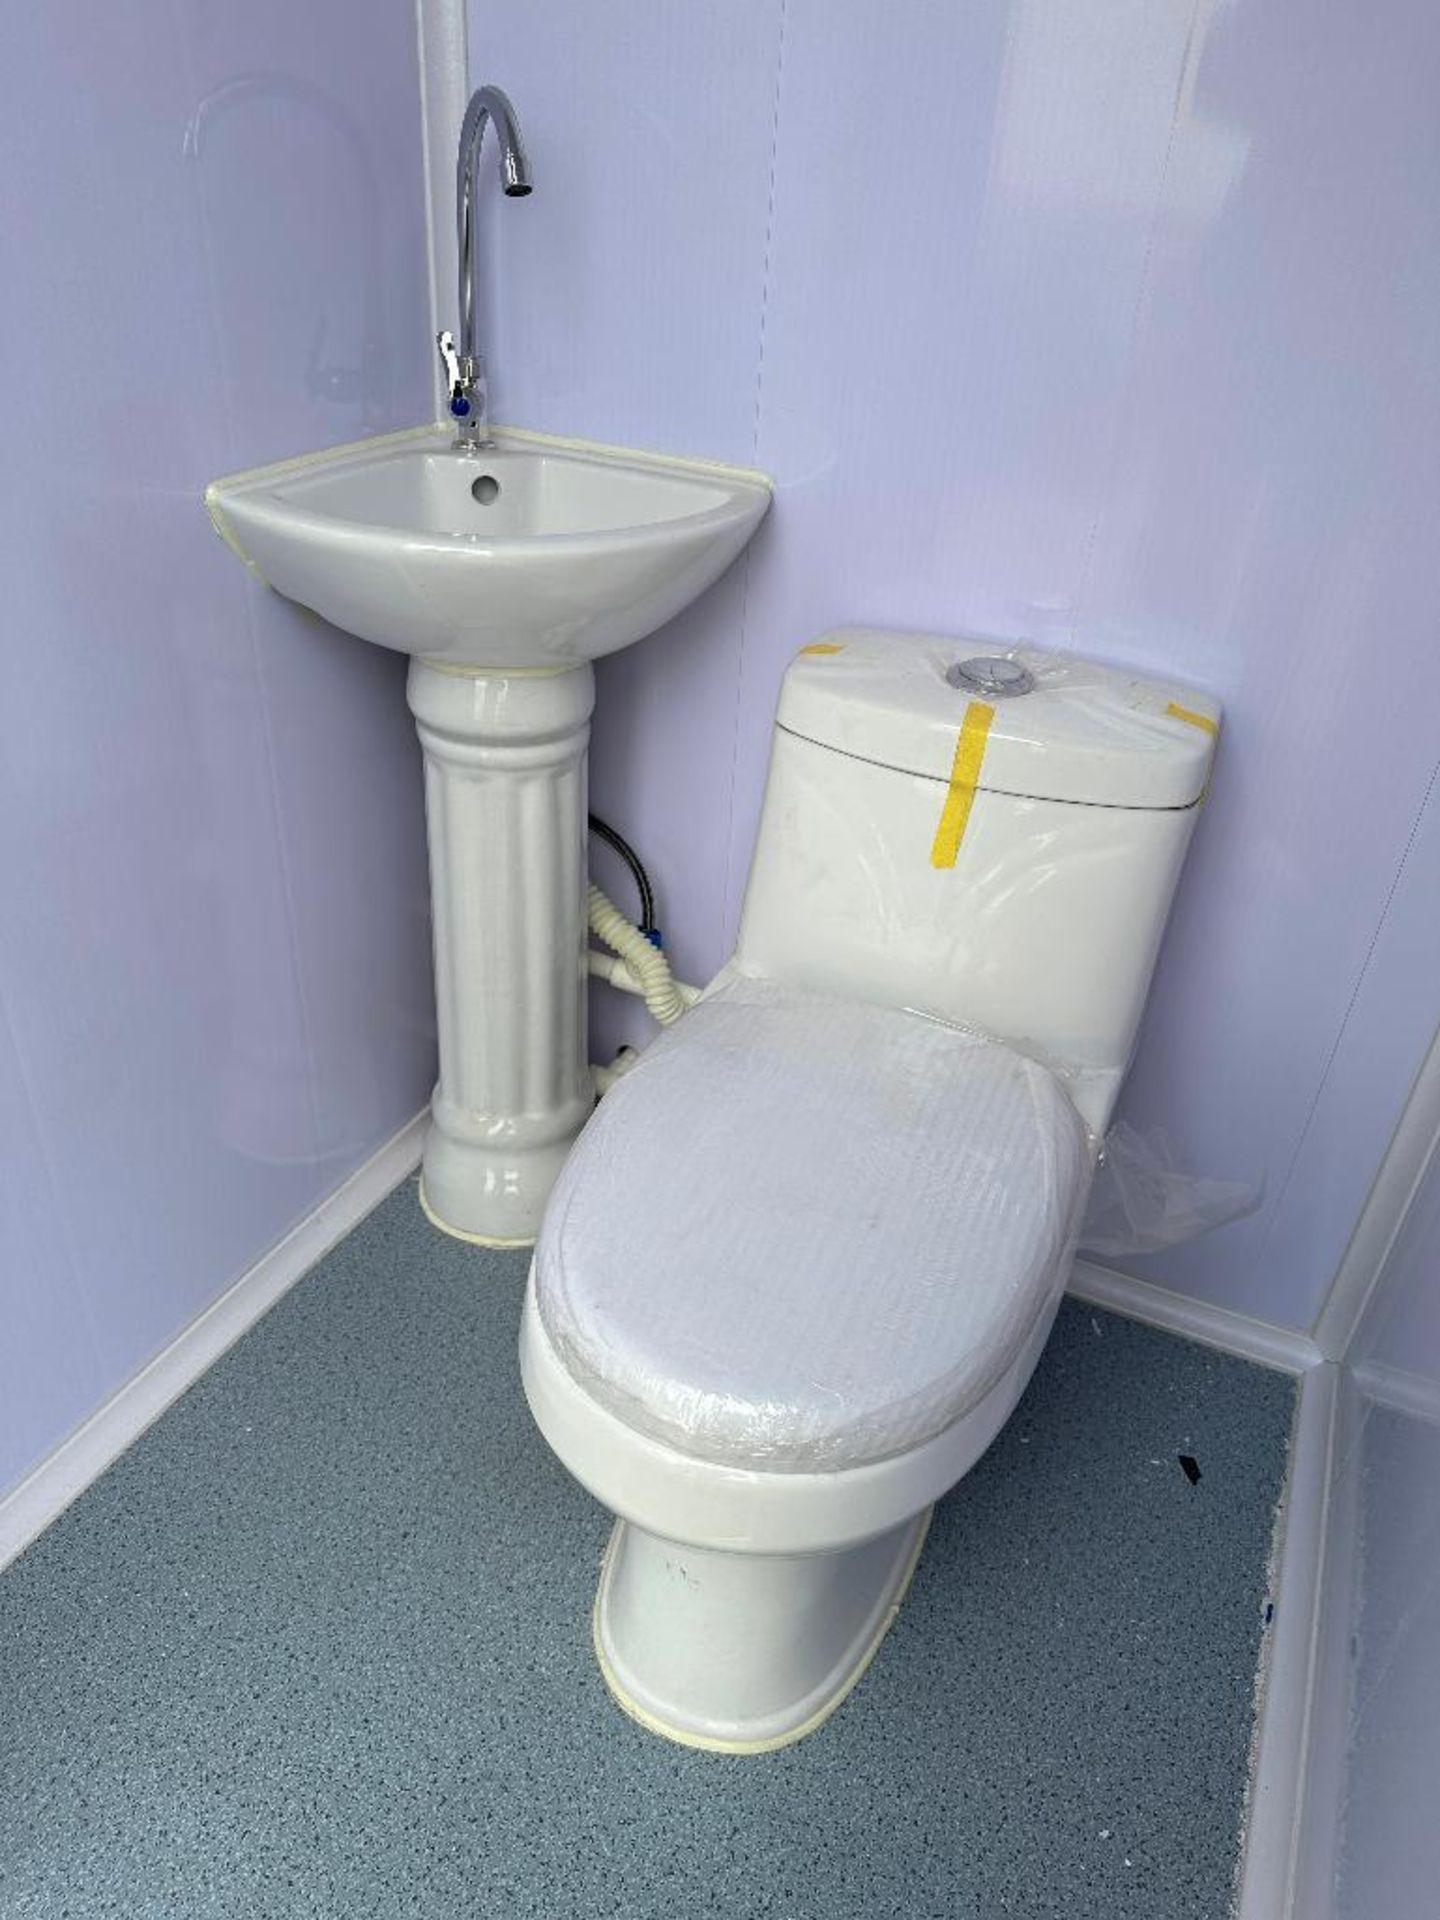 87" X 48" x 93" Double Sided Toilet w/ Fork Pockets, Sinks, Toilets, etc. - Image 7 of 9